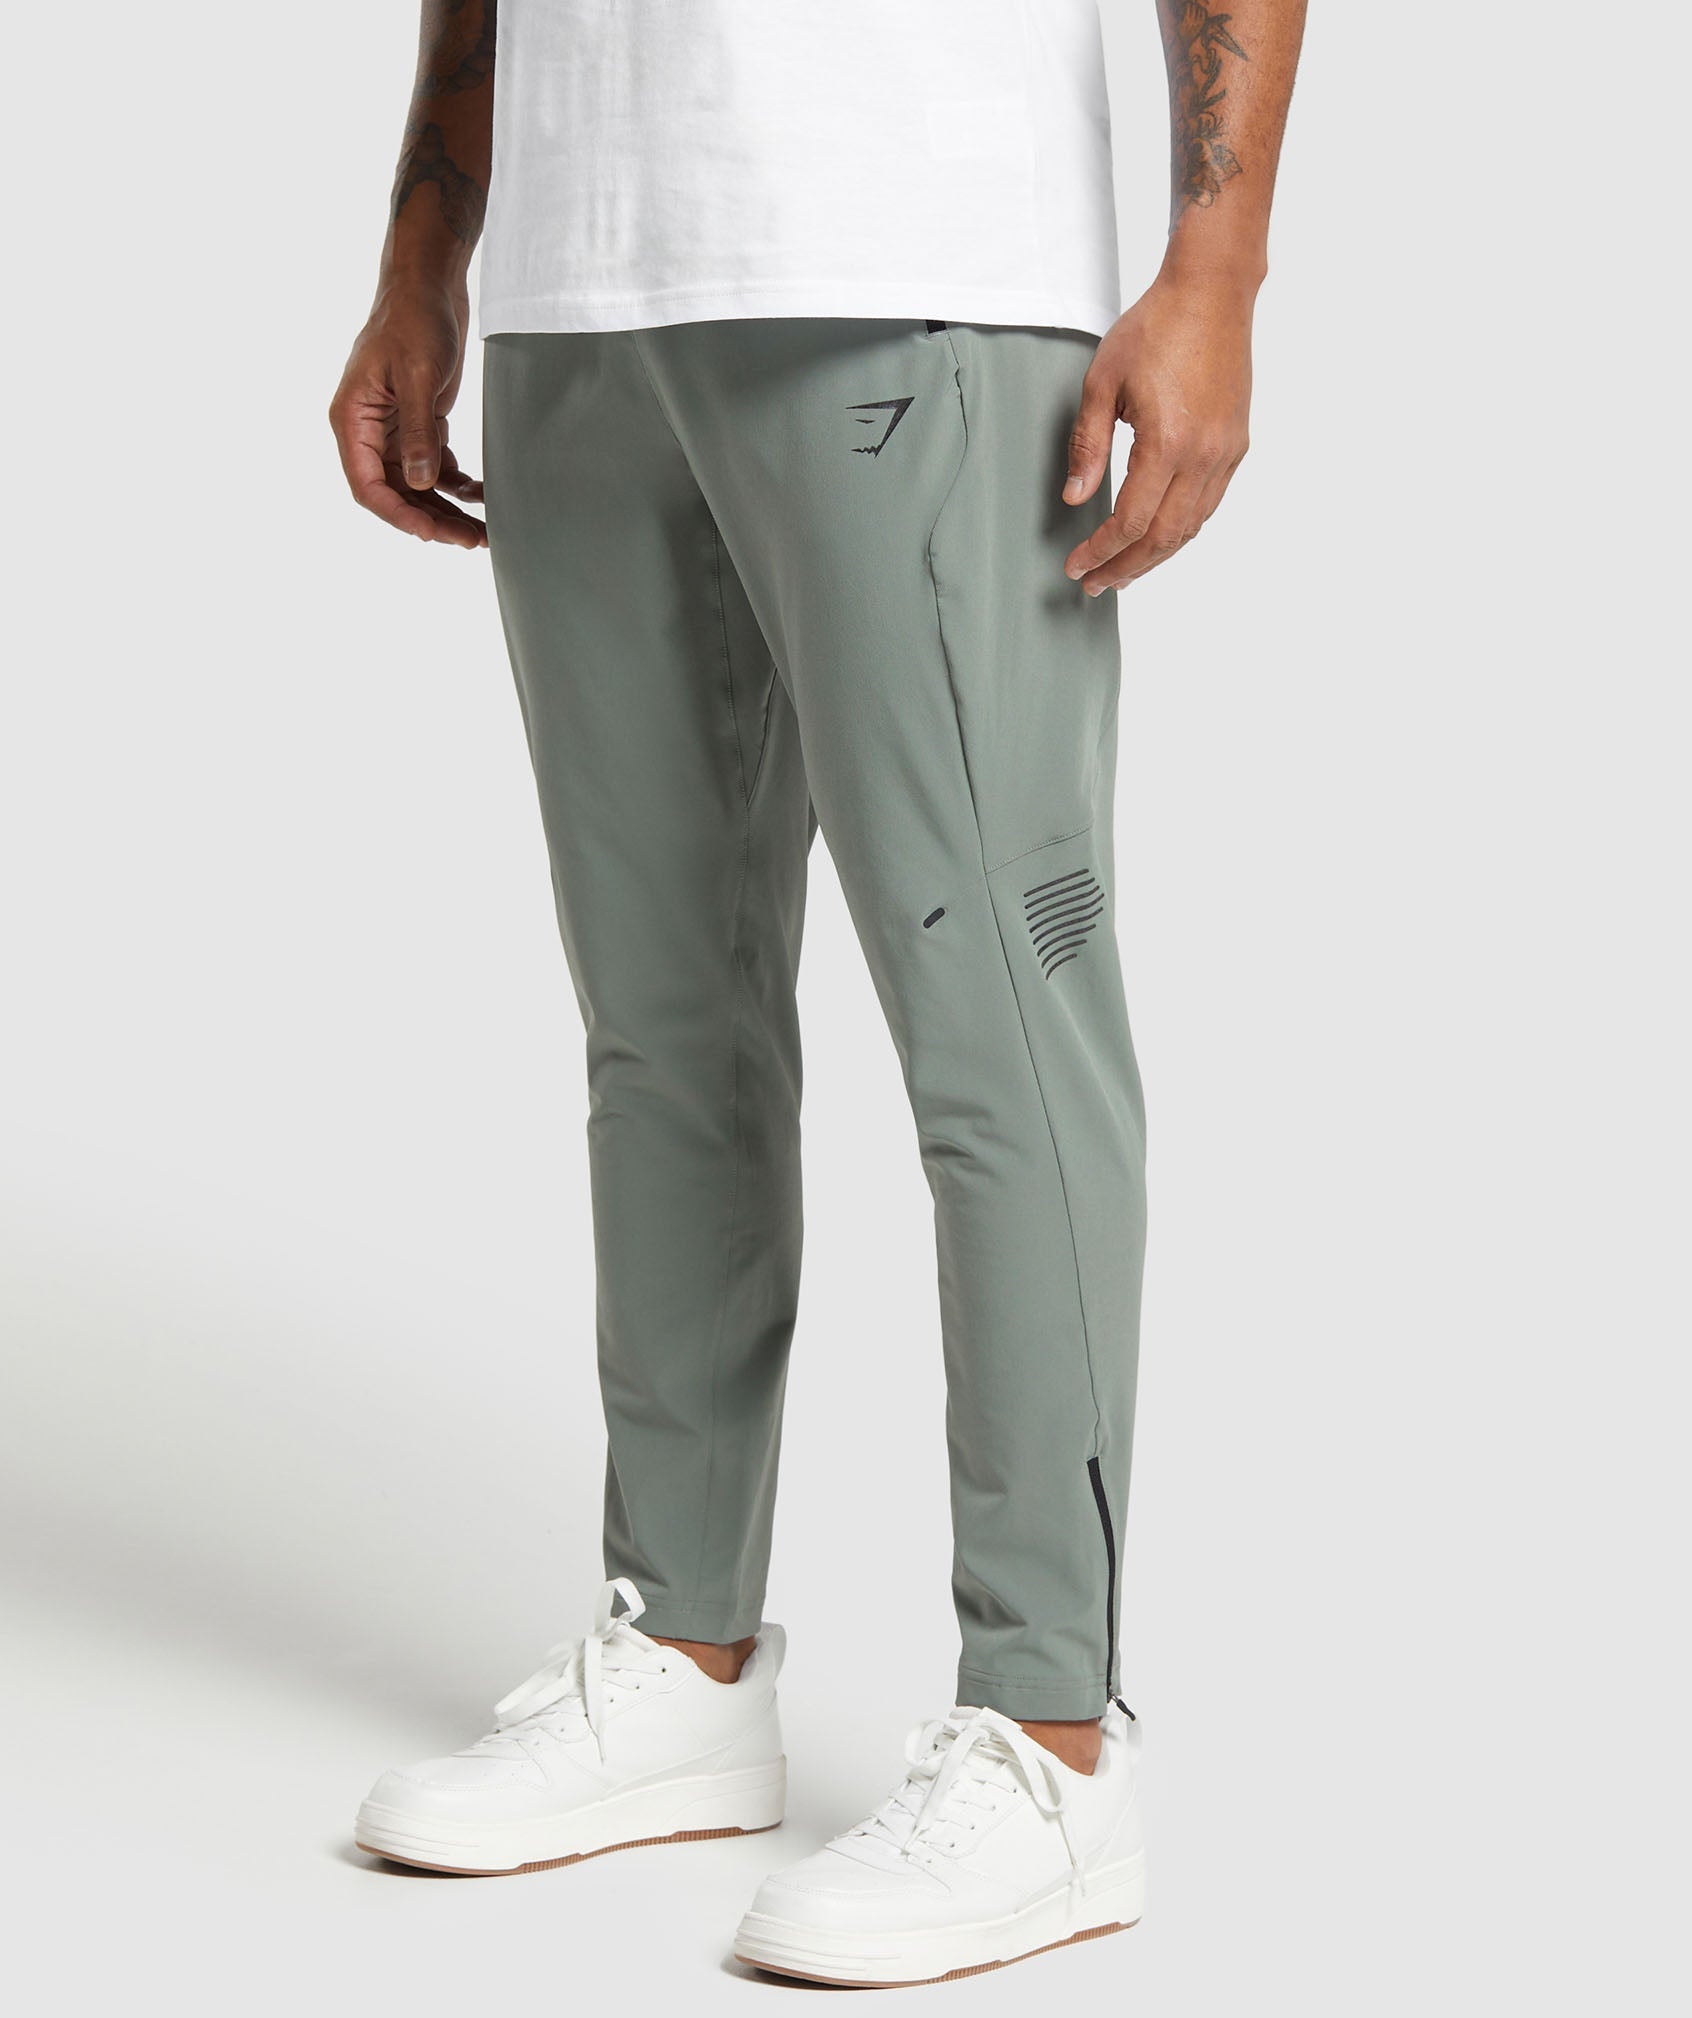 Apex Jogger in Unit Green - view 1